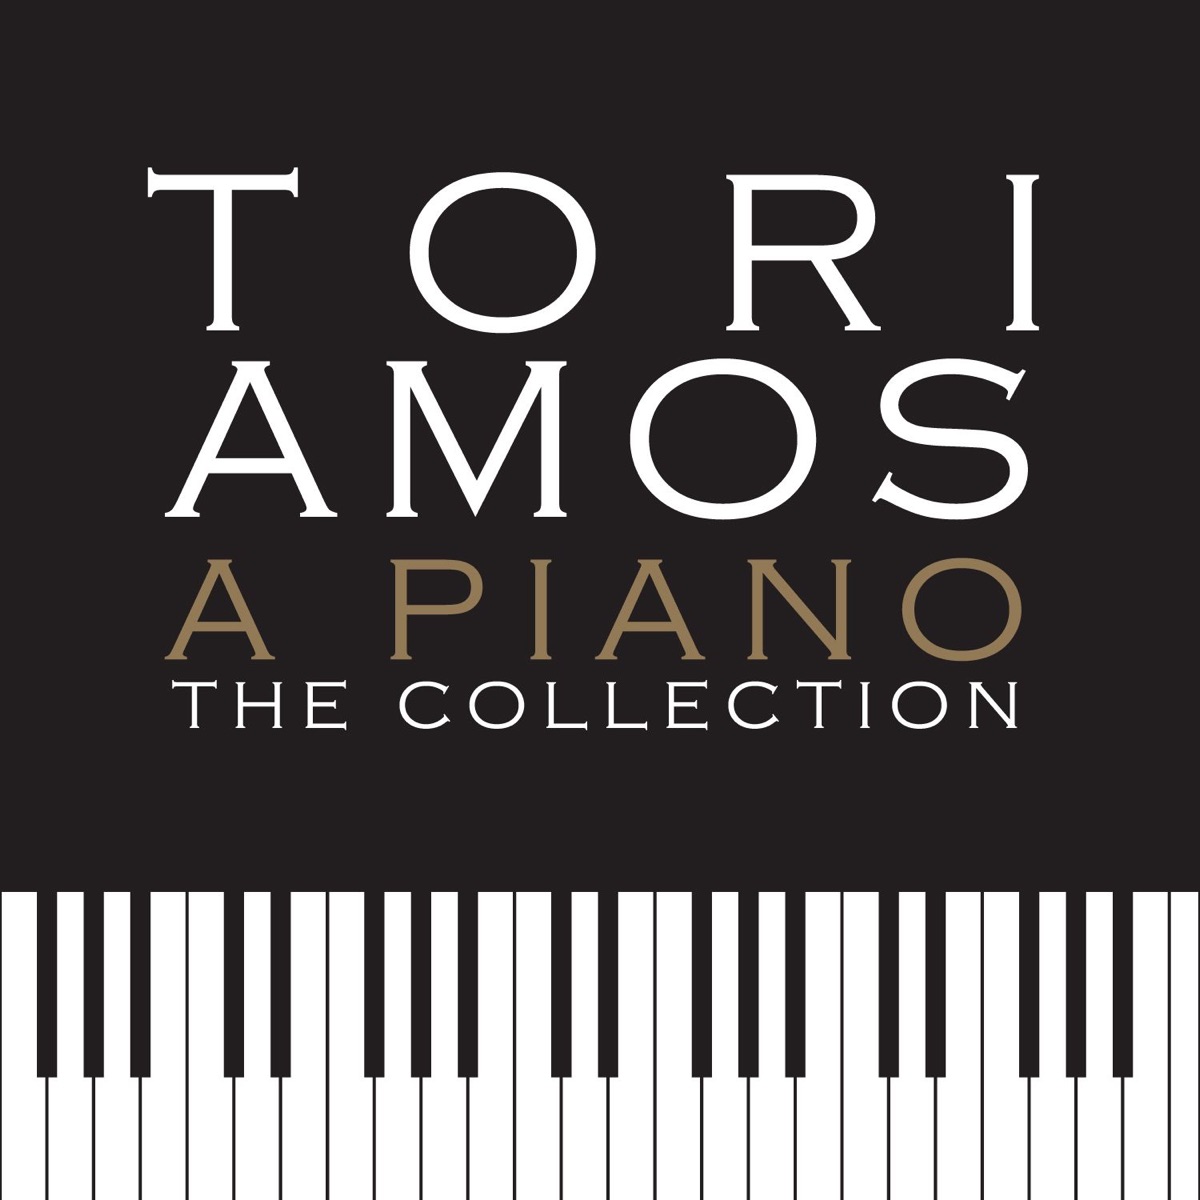 A Piano: The Collection - Album by Tori Amos - Apple Music